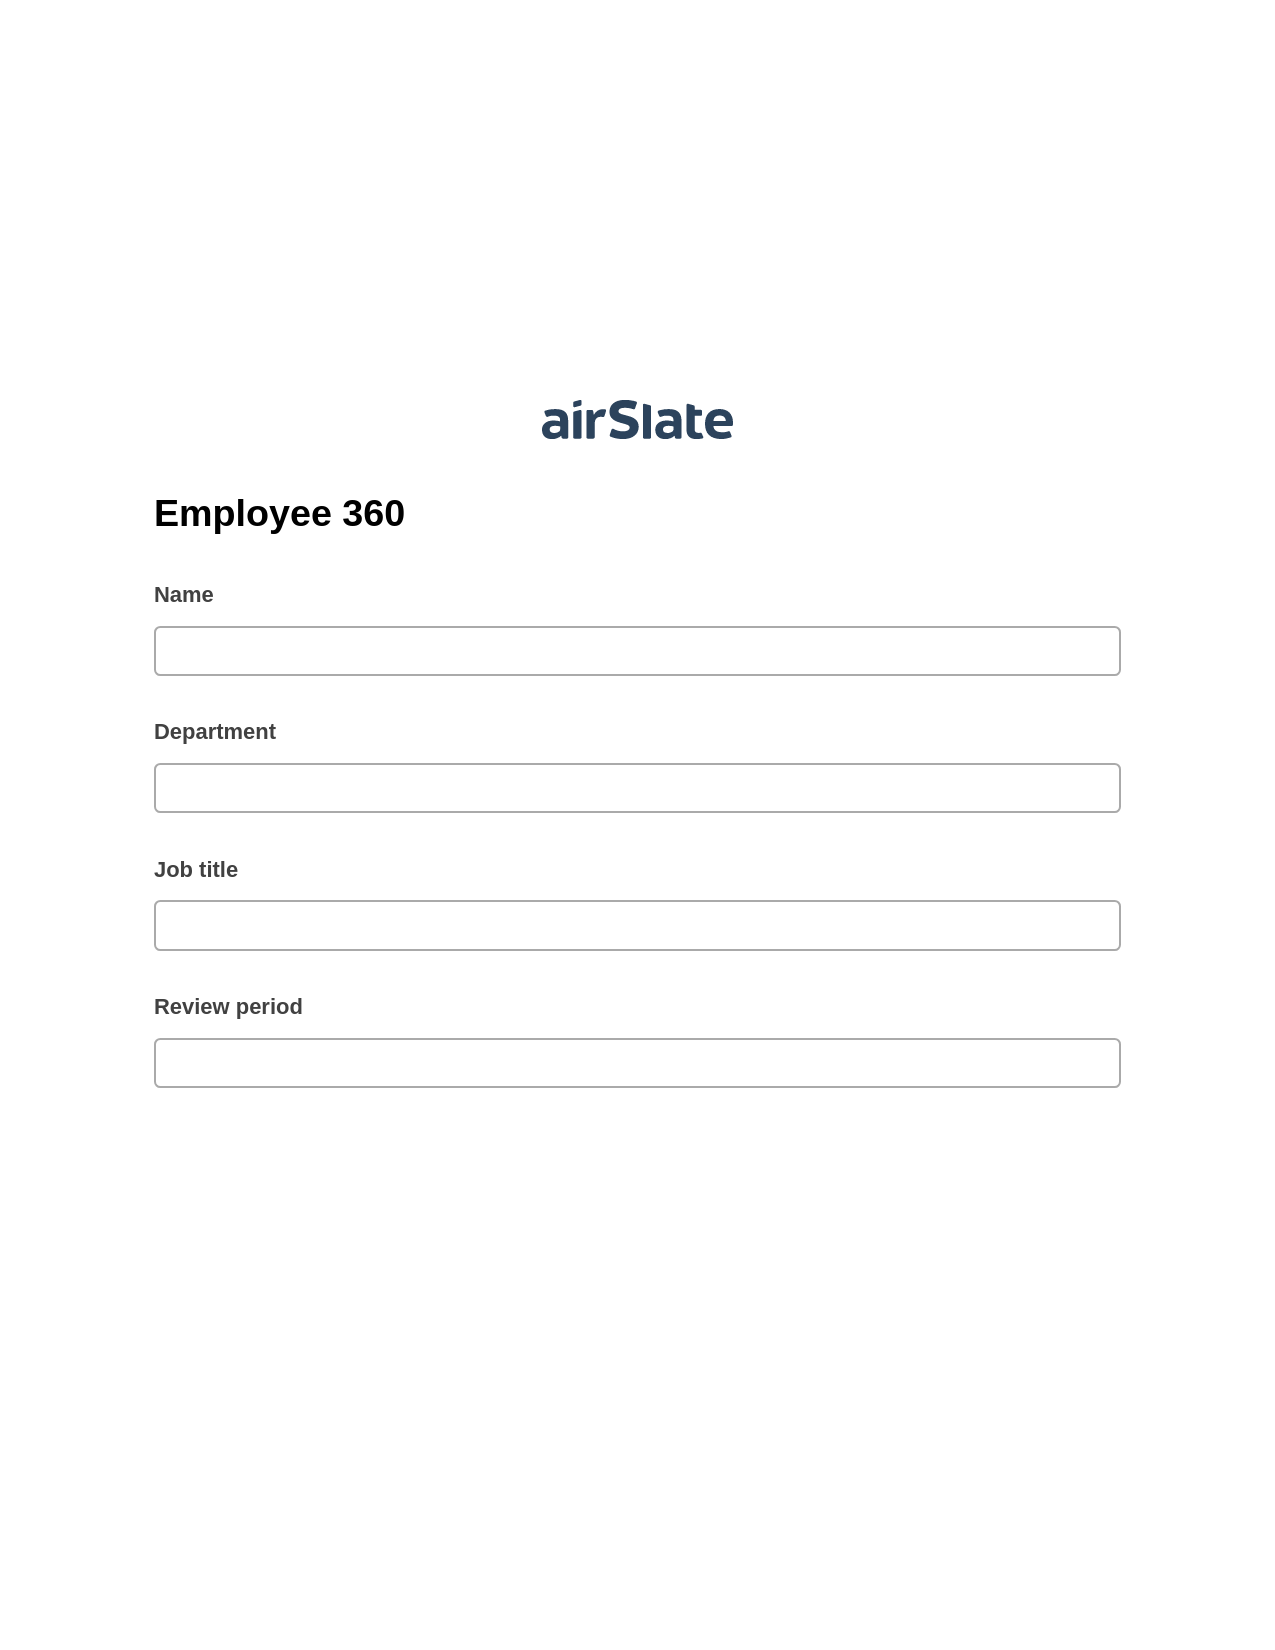 Employee 360 Pre-fill from MS Dynamics 365 Records, Export to MS Dynamics 365 Bot, Export to WebMerge Bot